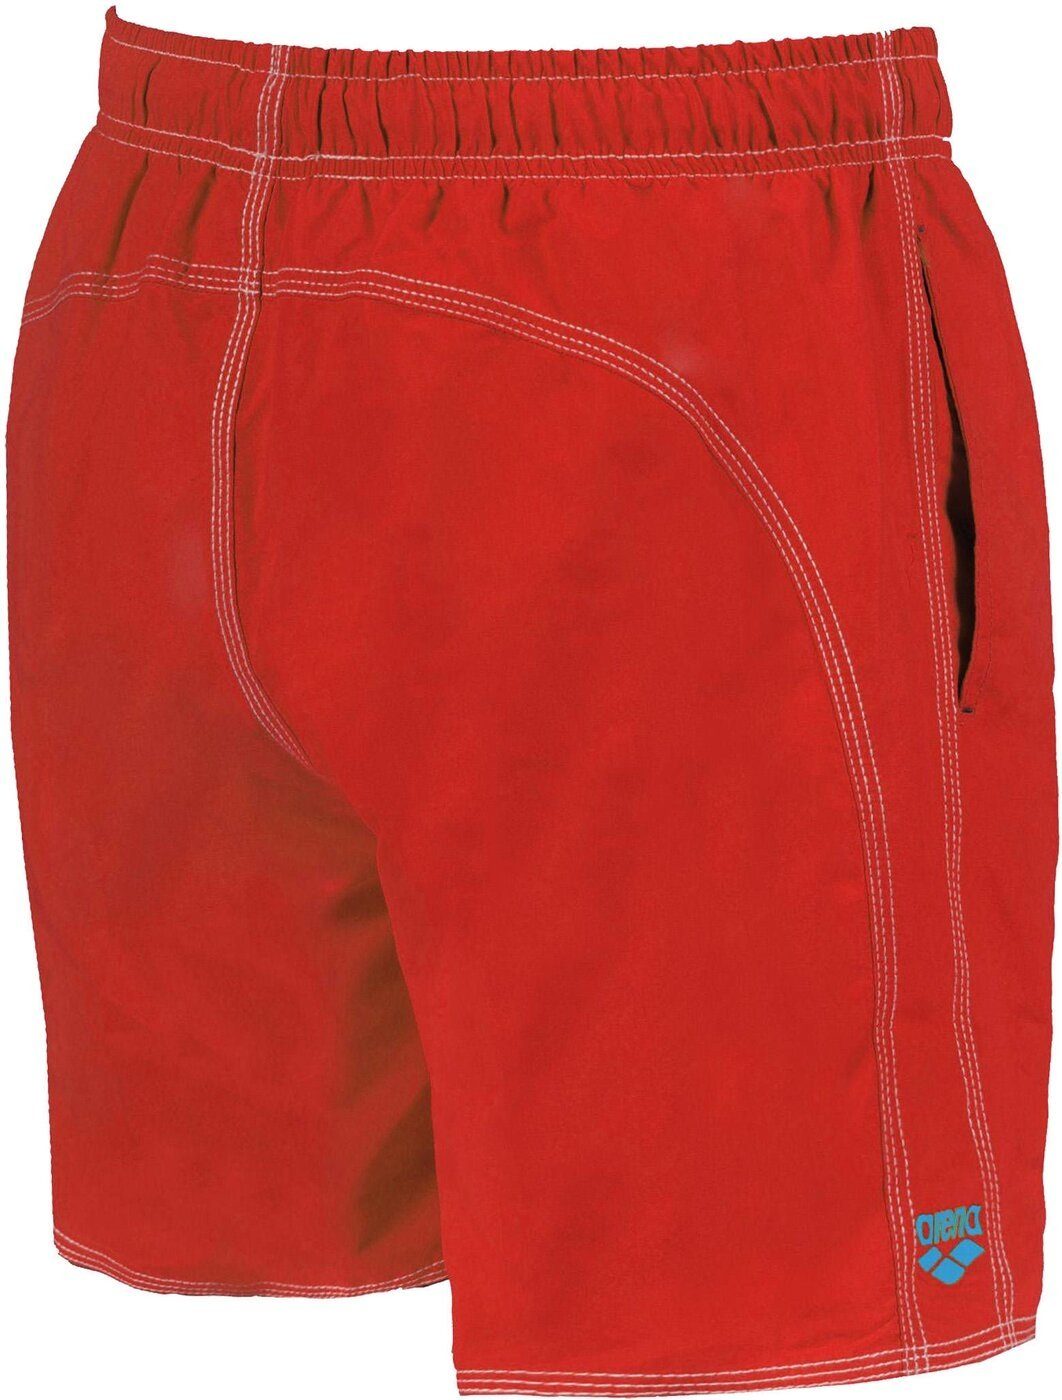 BOXER FUNDAMENTALS SOLID RED-TURQUOISE Badeshorts 48 Arena